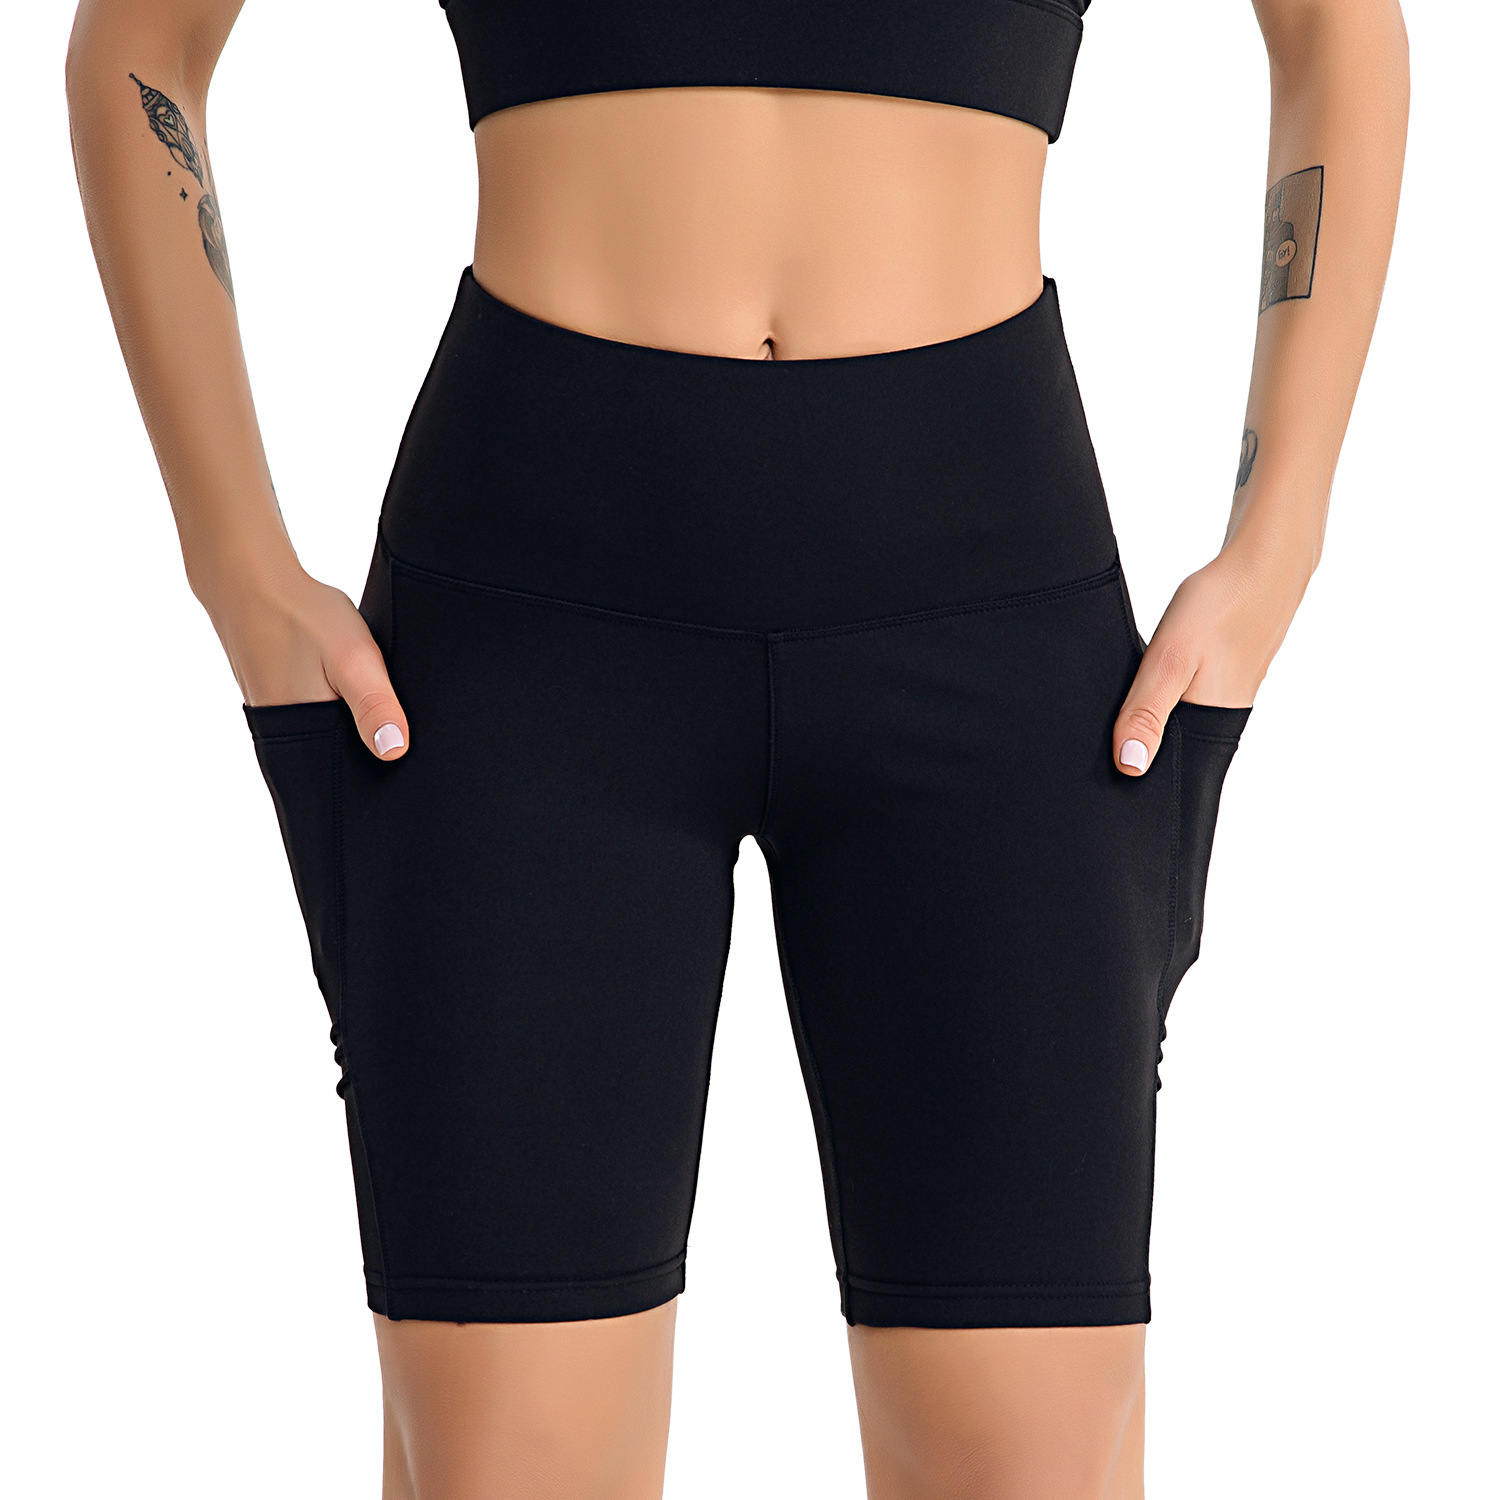 Best Workout shorts for big thighs for Women